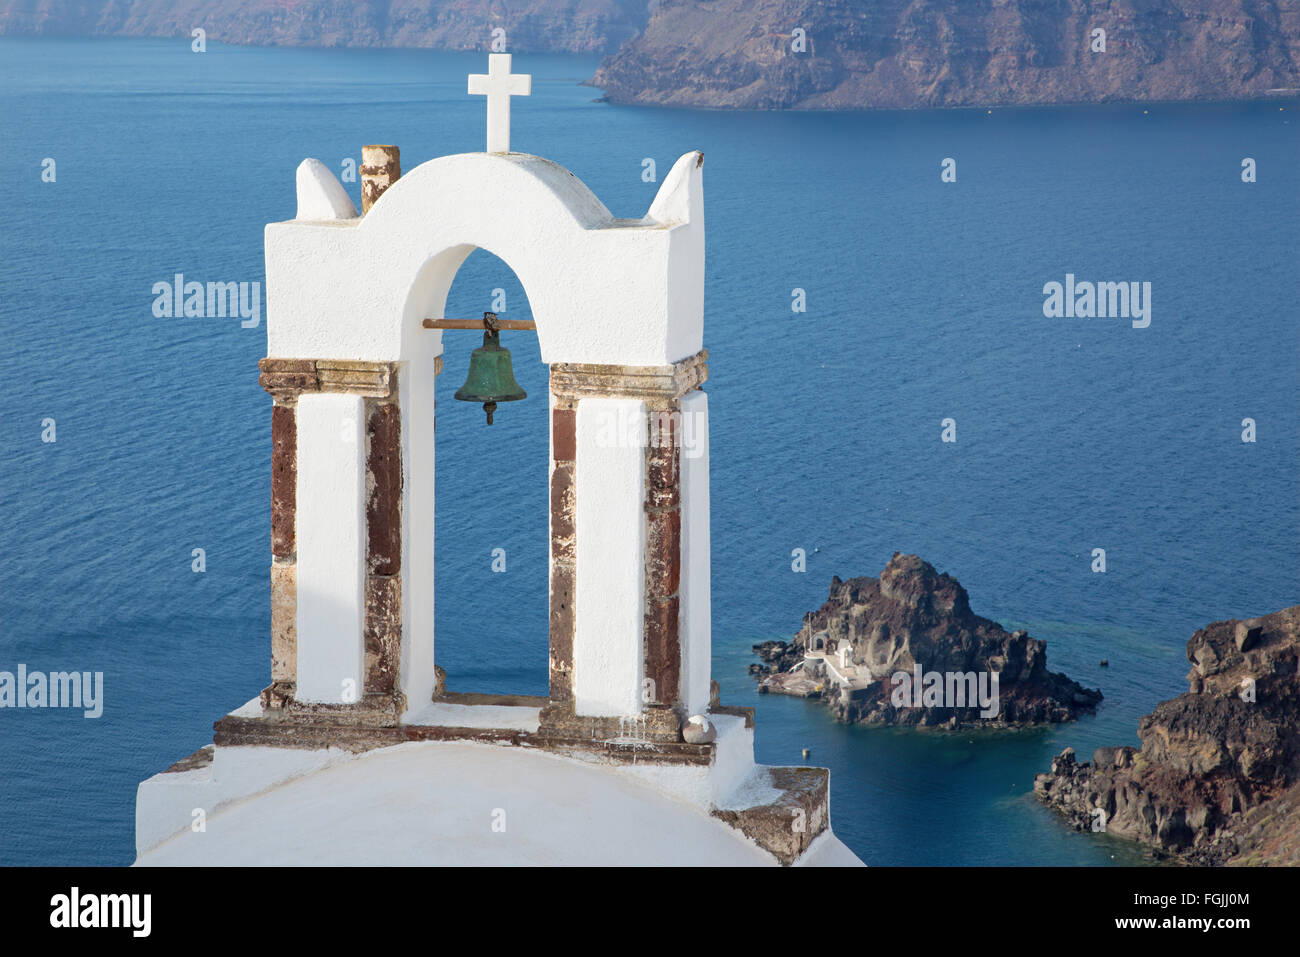 Santorini - The bell tower of typically little church in Oia (Ia) Stock Photo